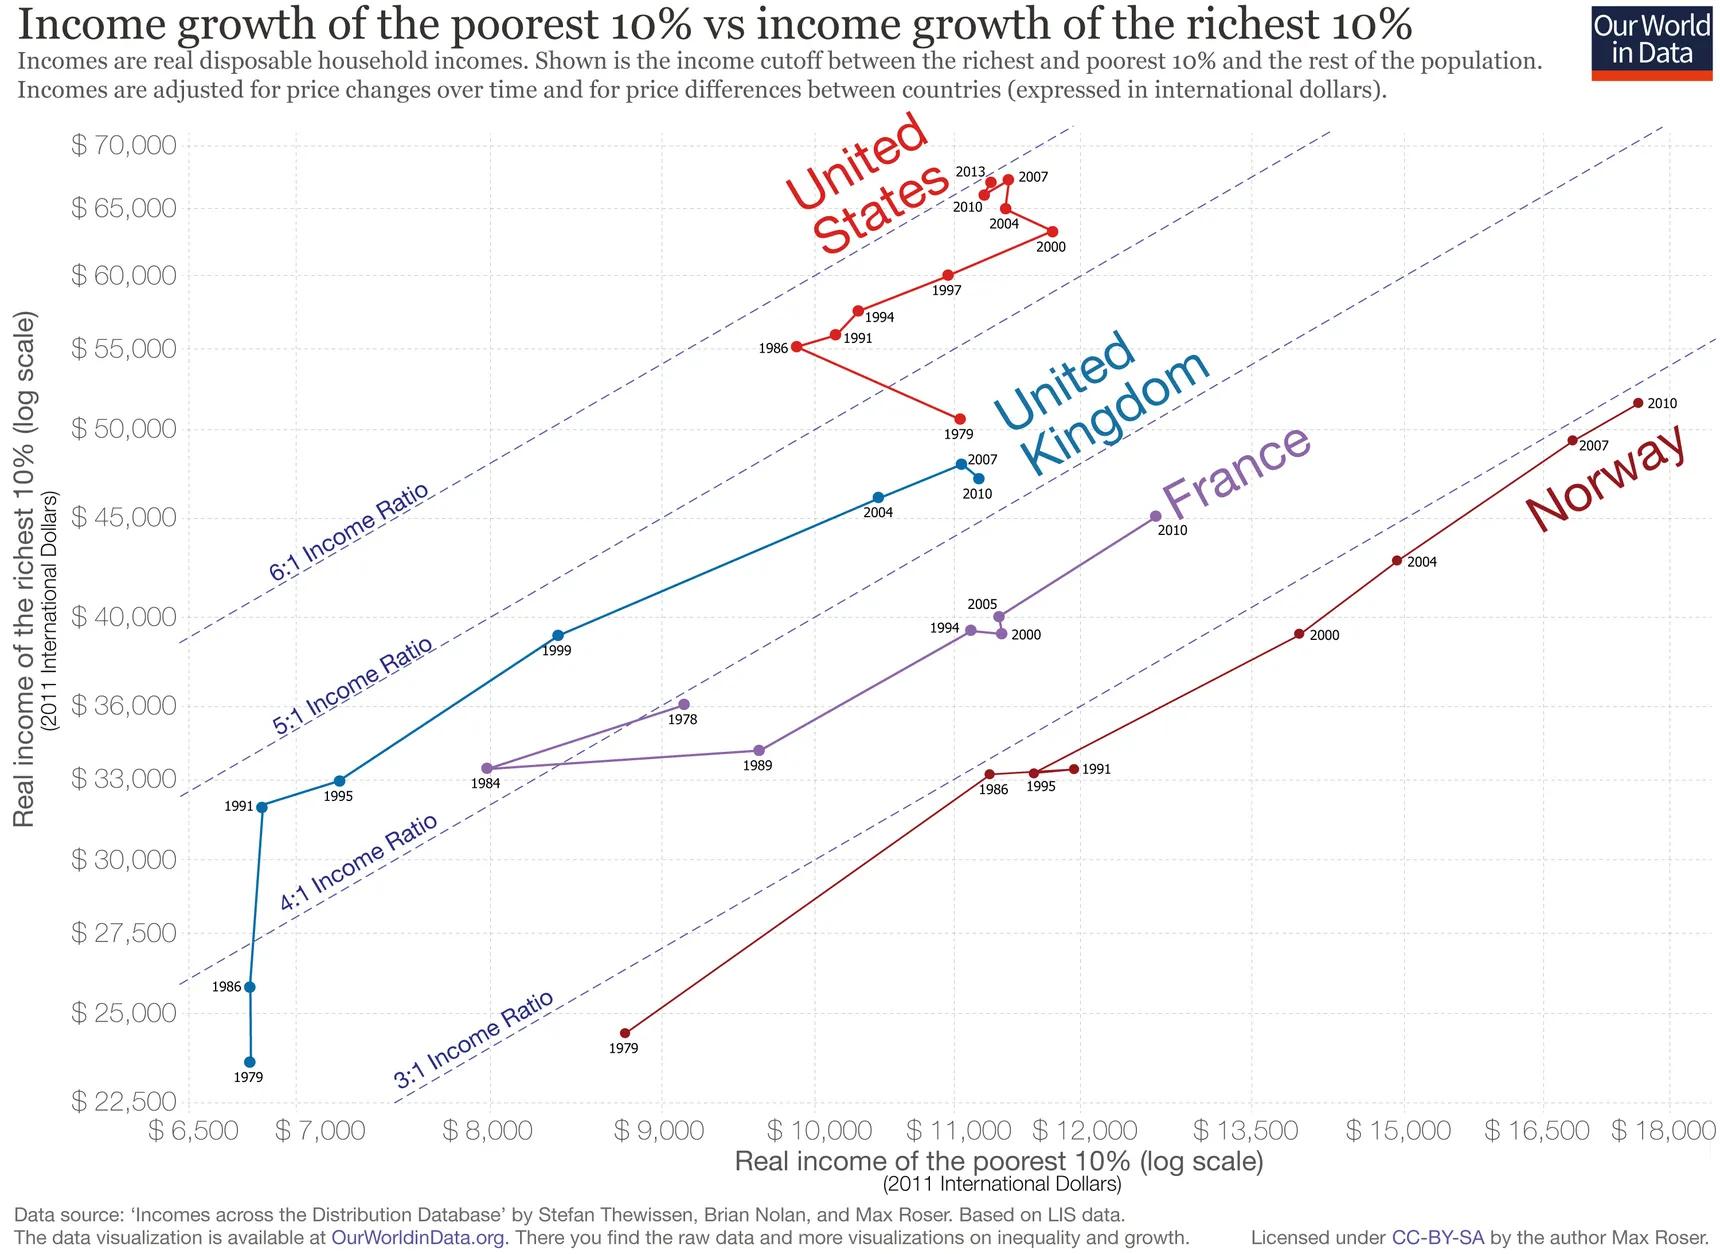 The same chart as above, but with the trajectories for the US and the UK added